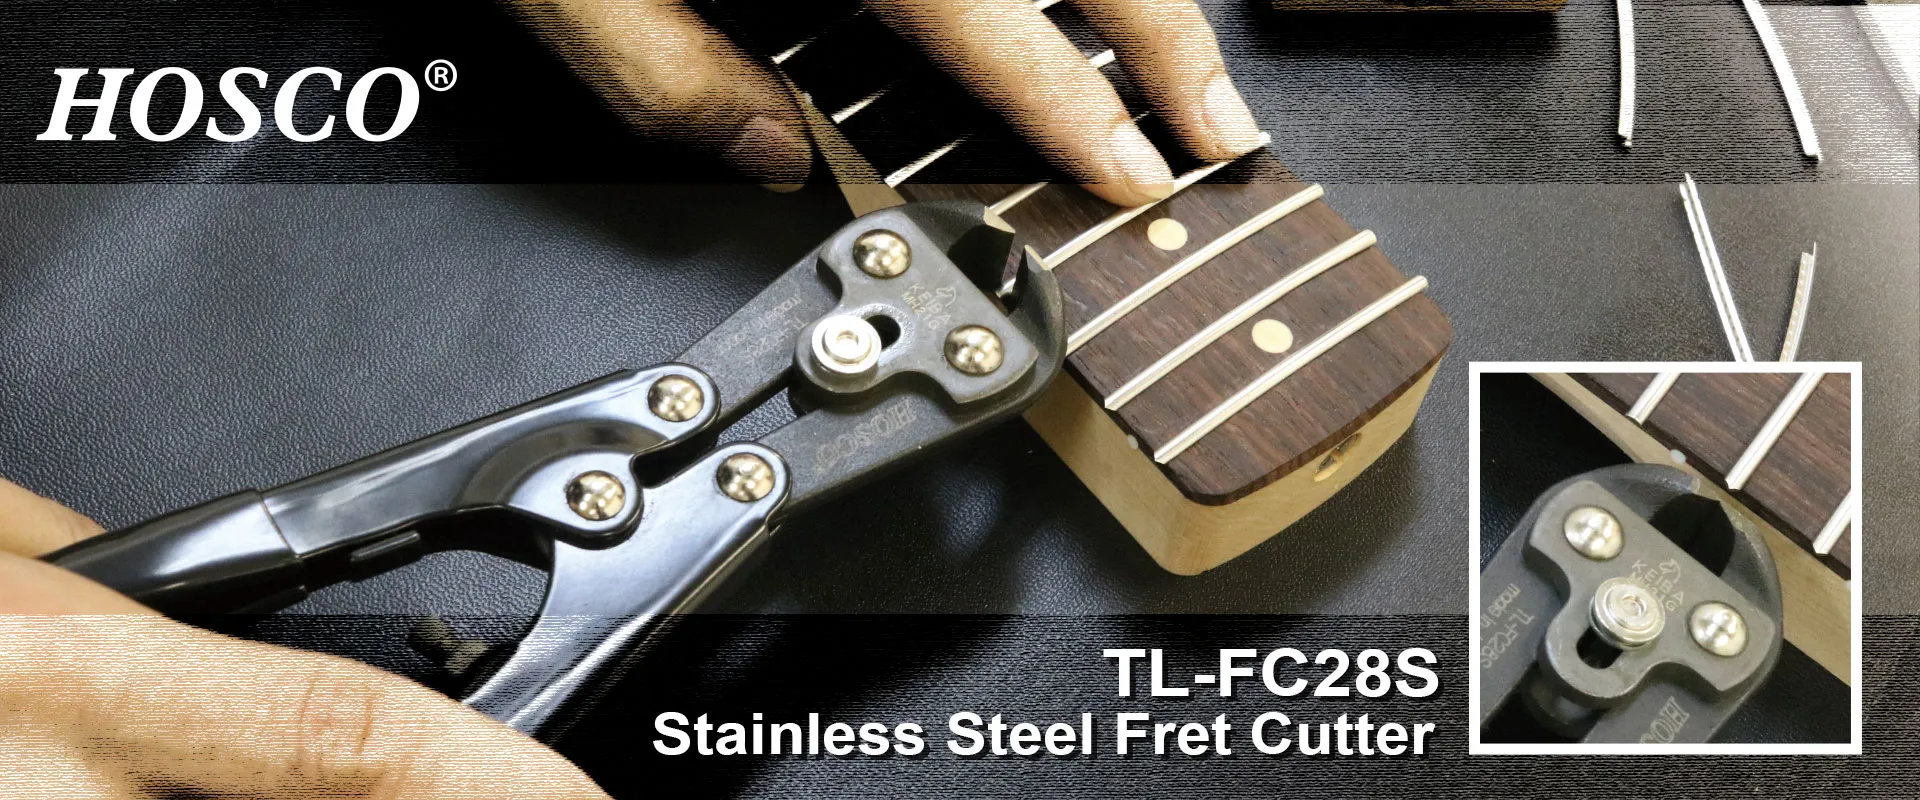 Stainless Steel Fret Cutter